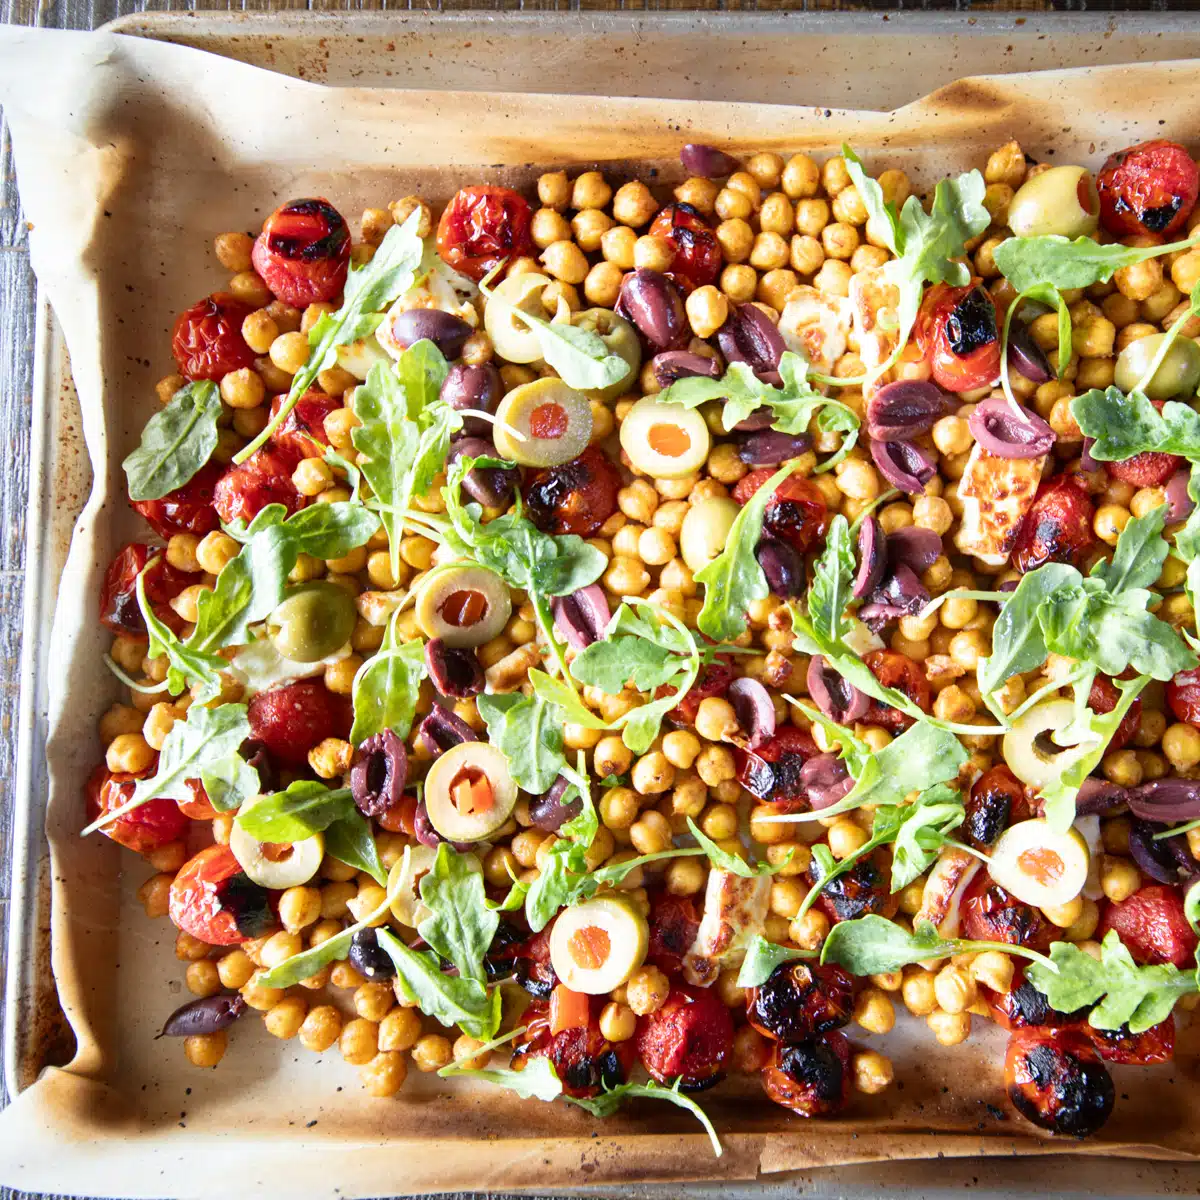 Warm roasted chickpea feta salad with olives, fire roasted tomatoes and arugula on a baking sheet ready to be served.